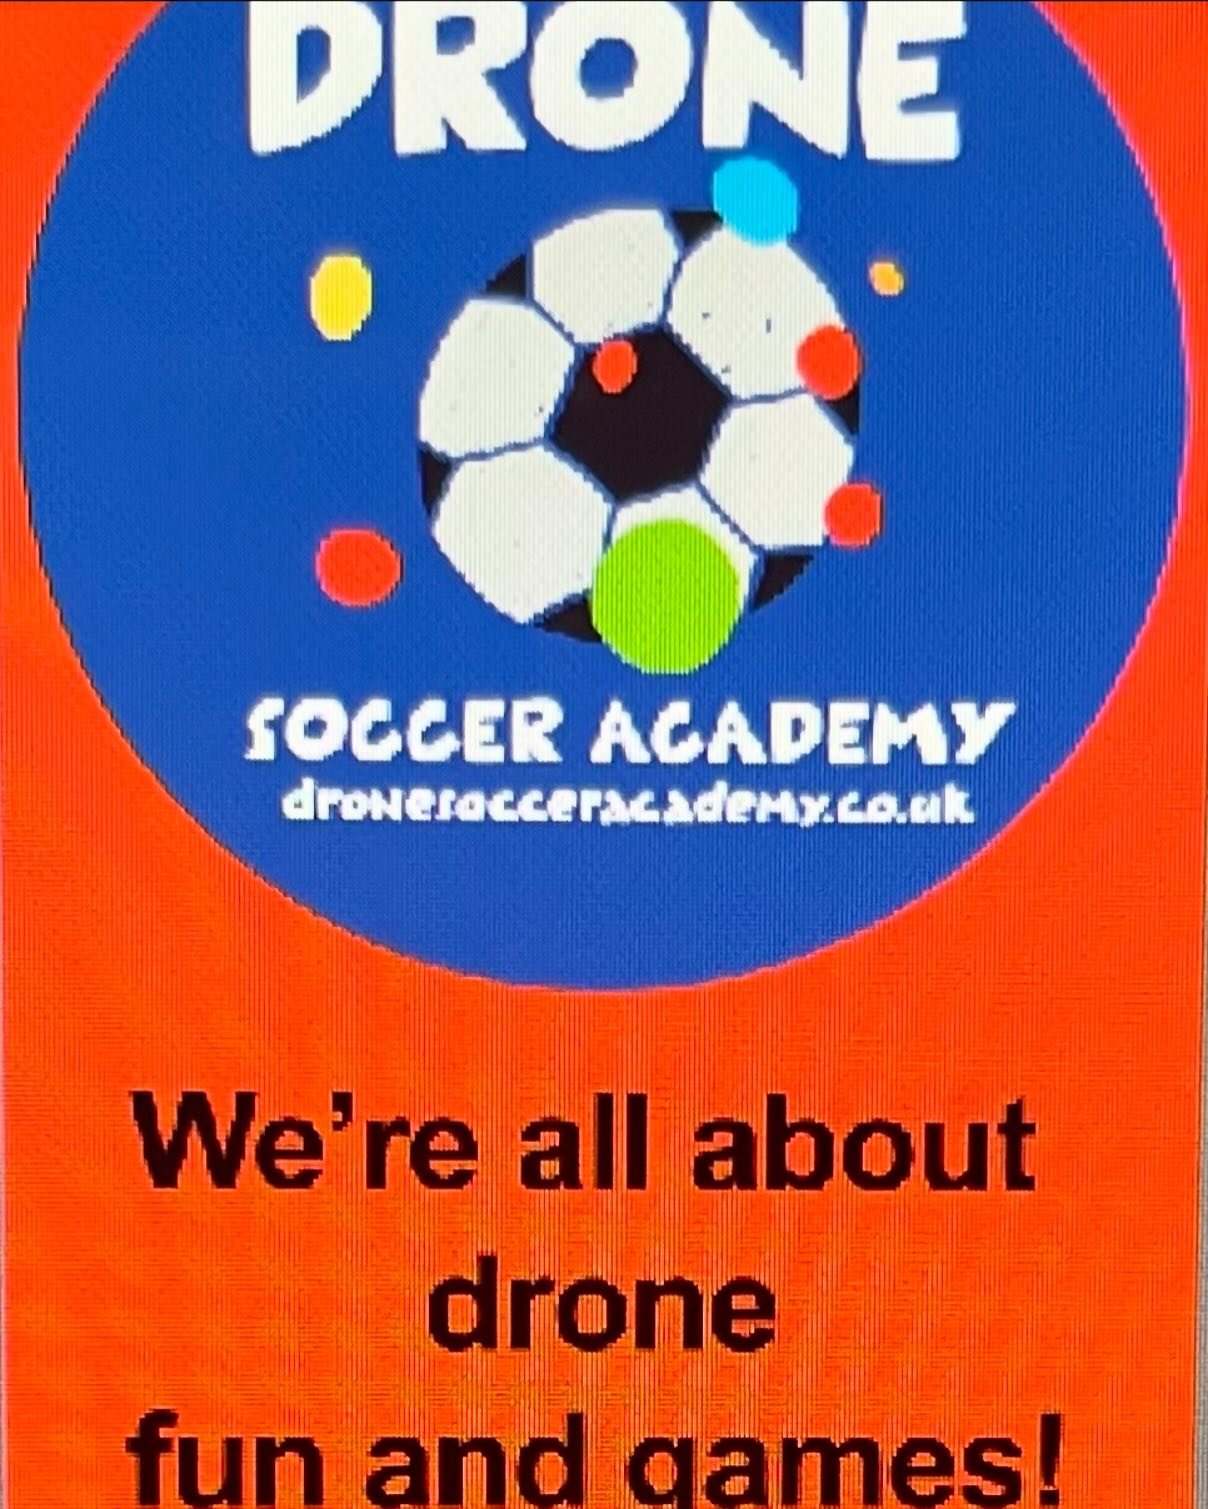 Website now open for business! Check out our events page for forthcoming &lsquo;have a try fly&rsquo; days! #dronesoccer #soccerdrones #letsplaydronesoccer#dronesocceracademy